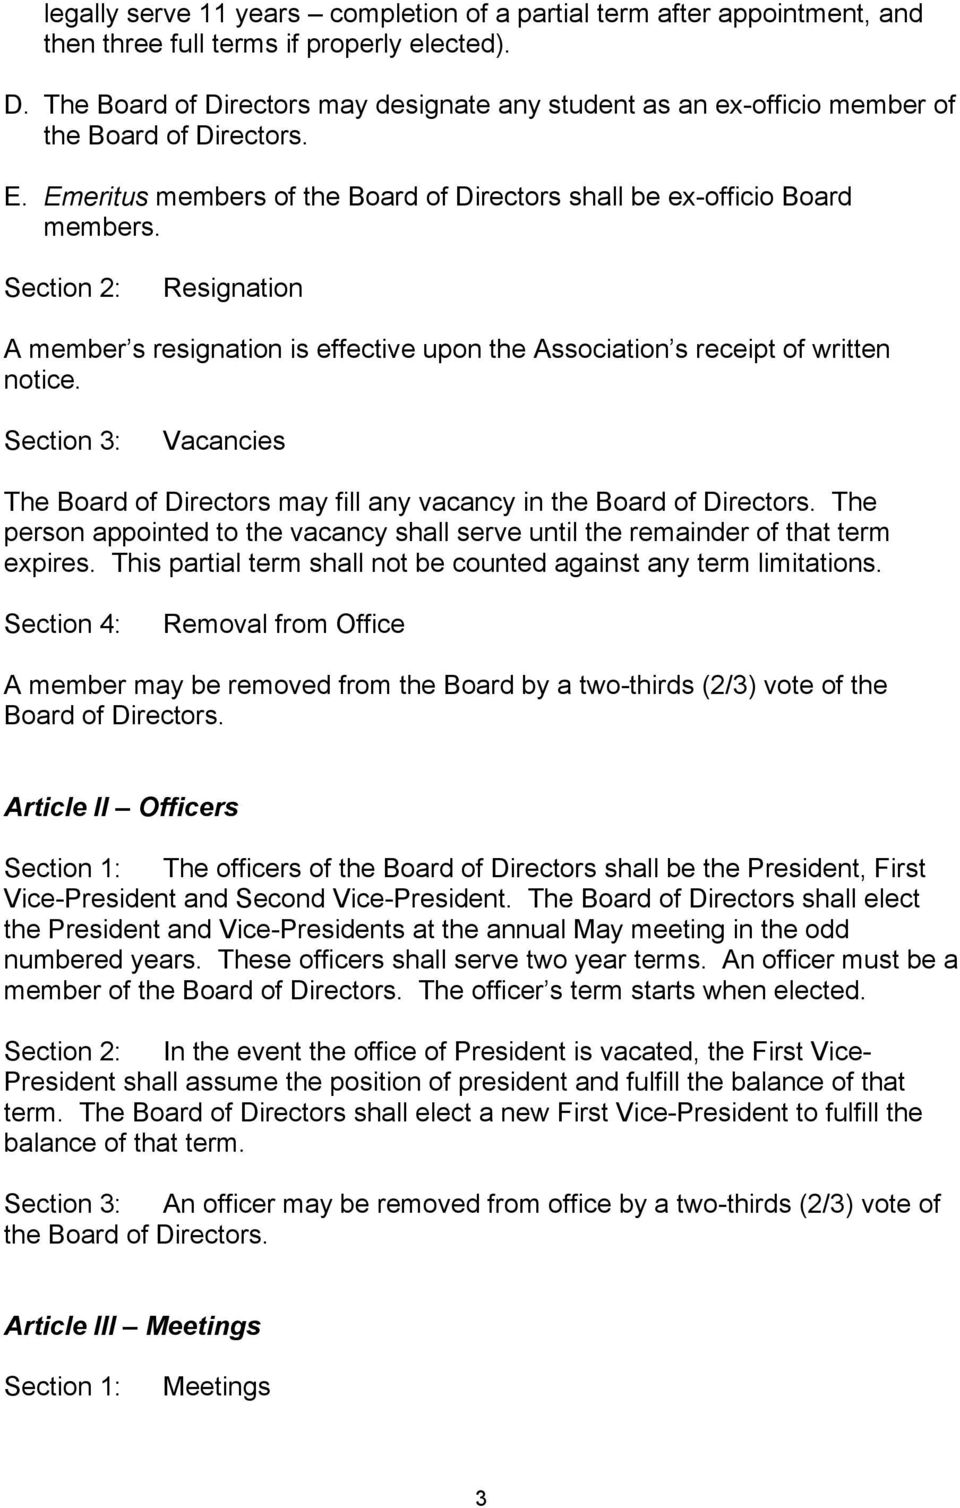 Section 2: Resignation A member s resignation is effective upon the Association s receipt of written notice. Section 3: Vacancies The Board of Directors may fill any vacancy in the Board of Directors.